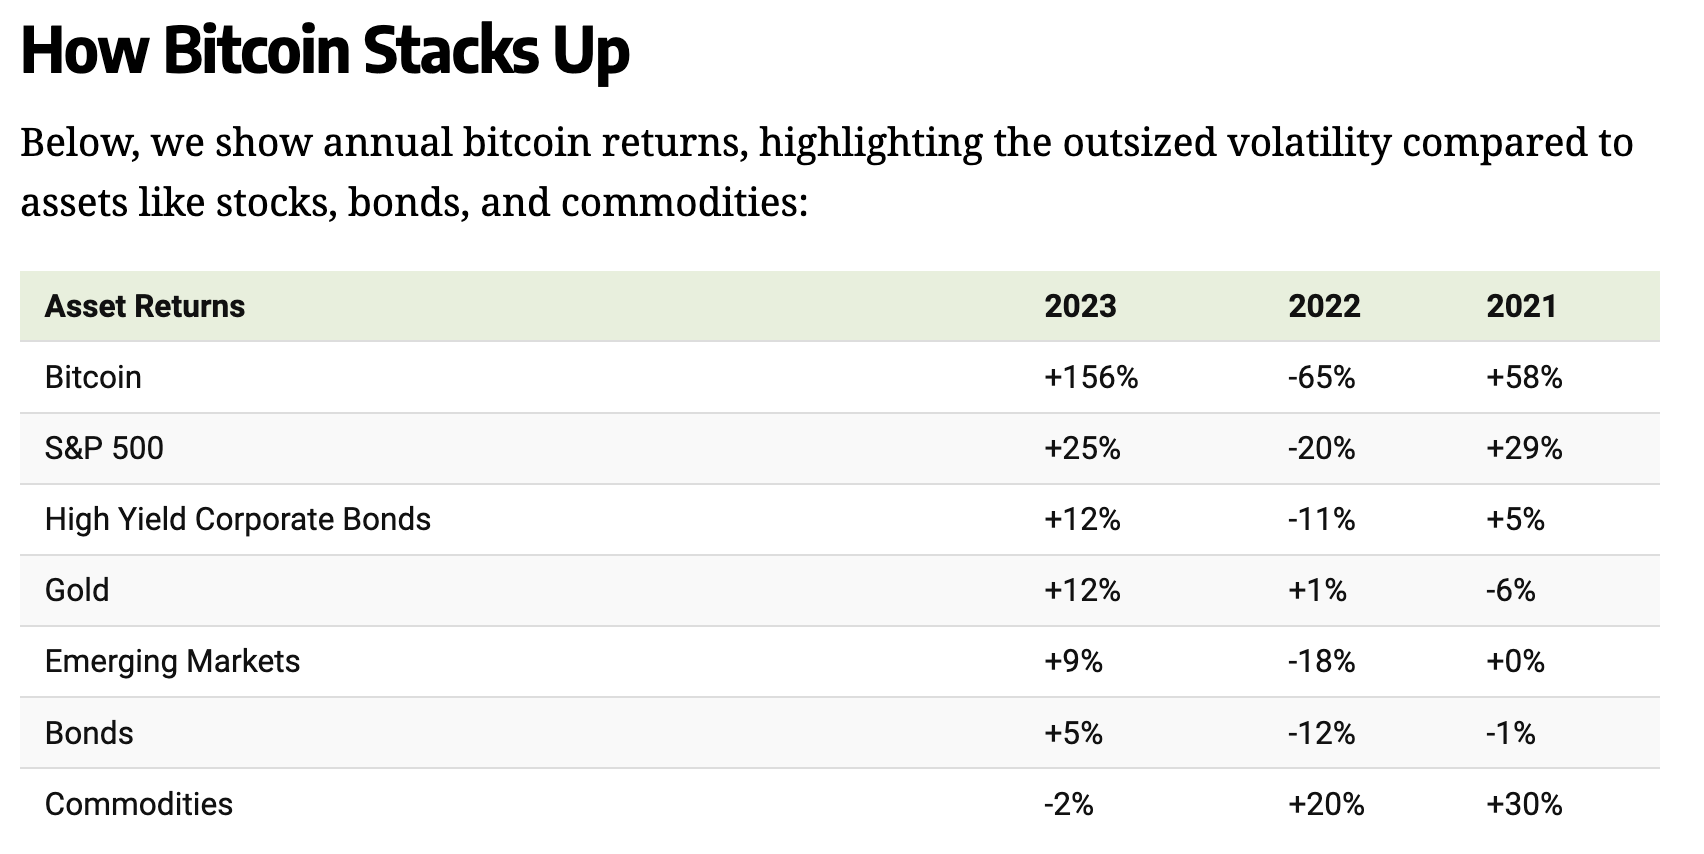 Bitcoin Is World’s Best Performing Asset Class Over Past 10 Years (#GotBitcoin)